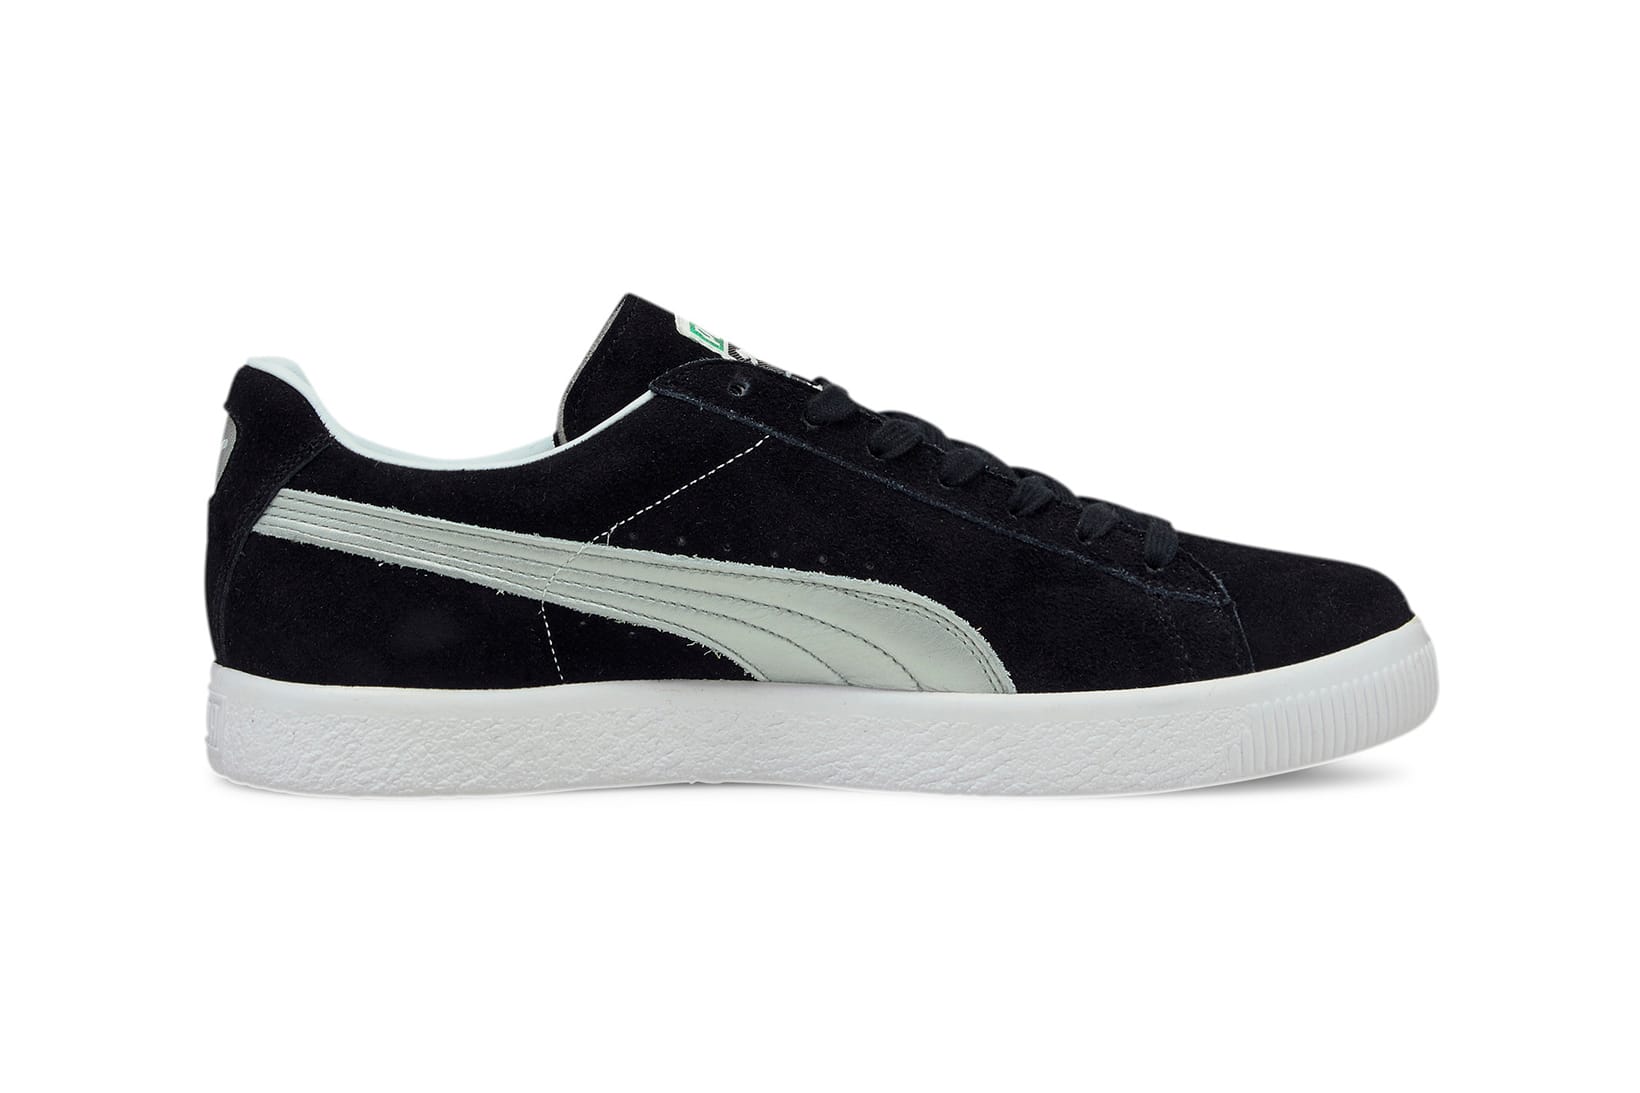 PUMA Releases Suede VTG With Shiny 